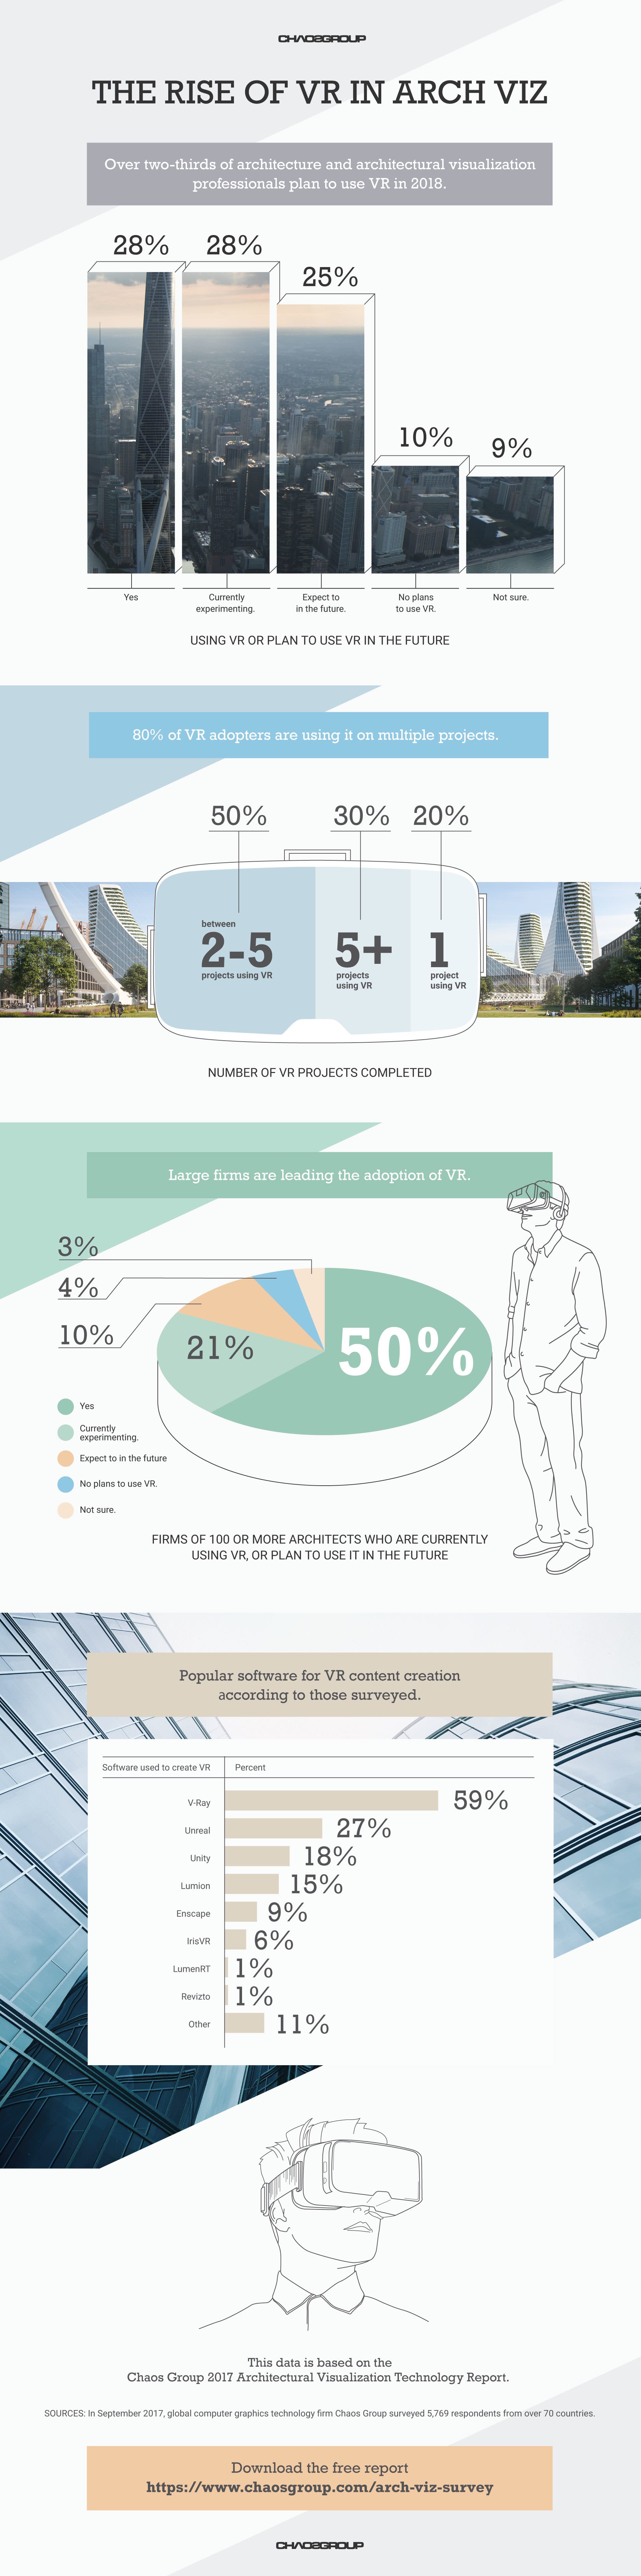 VR in Architecture Infographic by Chaos Group